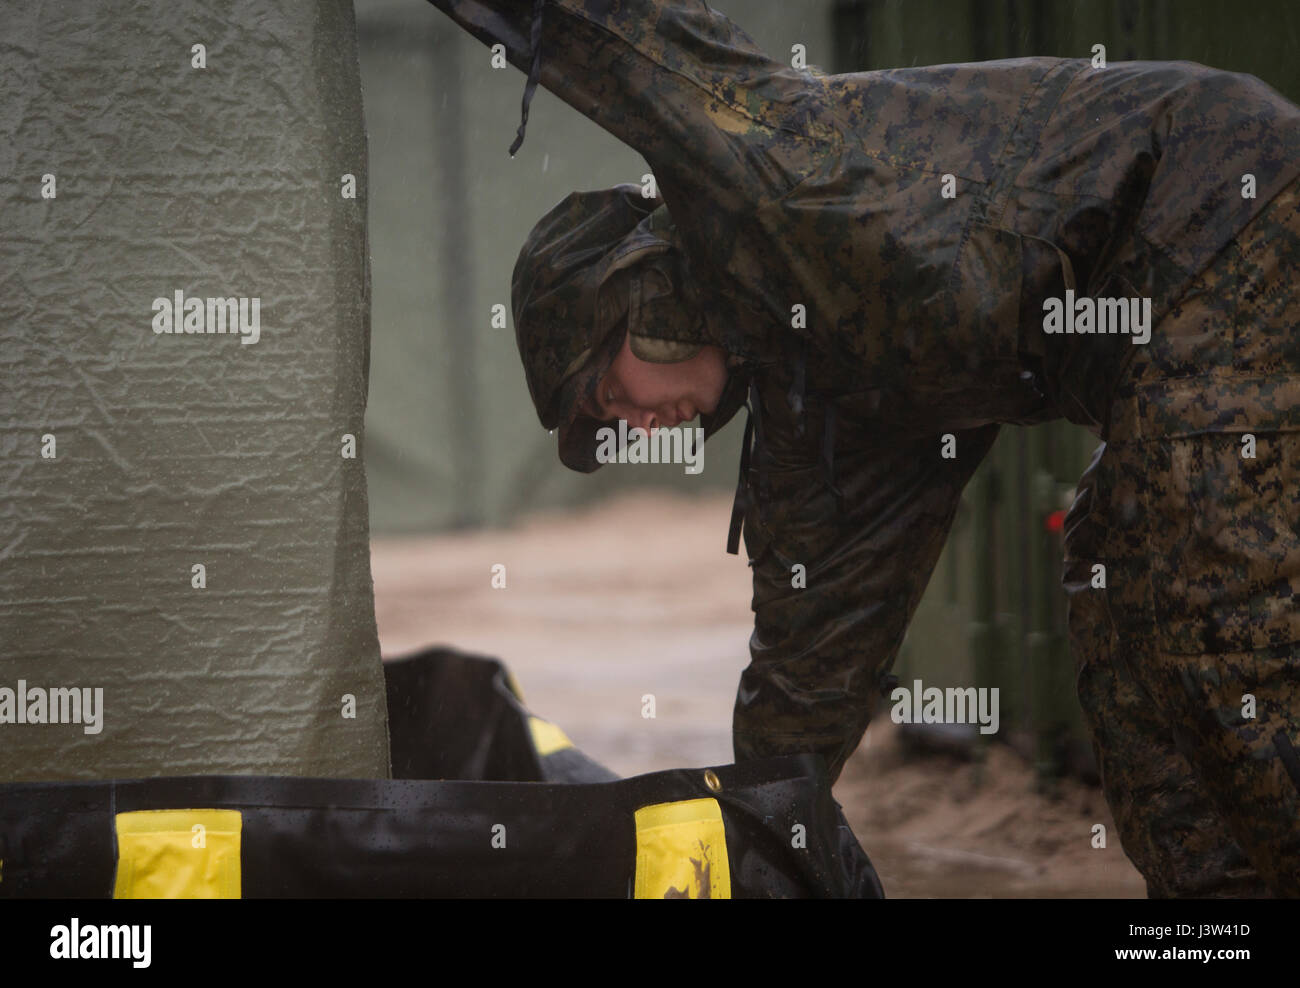 CAMP LEJEUNE, N.C. – Sgt. Andrew C. Mooney, an engineer equipment electrical systems technician with the Combat Logistics Element, Special Purpose Marine Air-Ground Task Force - Southern Command, drains rain water from a spill kit during General Exercise 2 at Marine Corps Base Camp Lejeune, North Carolina, April 24, 2017. The Logistics Combat Element set up camp at Engineer Training Area 2 in order to simulate a schoolhouse construction site in preparation for their upcoming deployment to Central America. (U.S. Marine Corps photo by Sgt. Ian Leones) Stock Photo